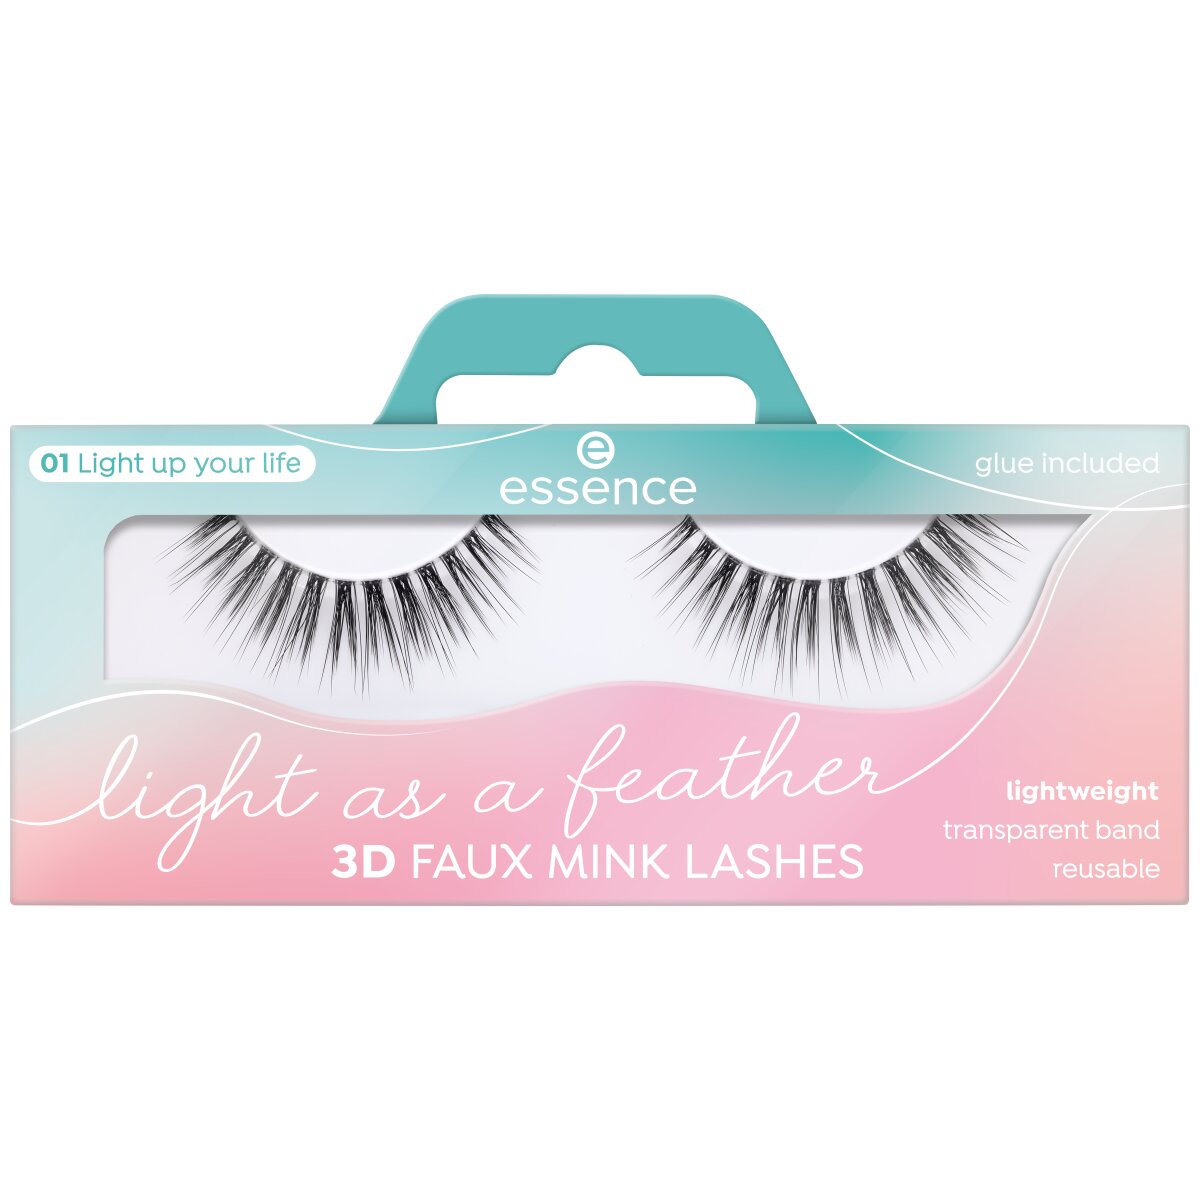 essence Light 3D Mink A Lashes Faux As – House of Cosmetics Feather